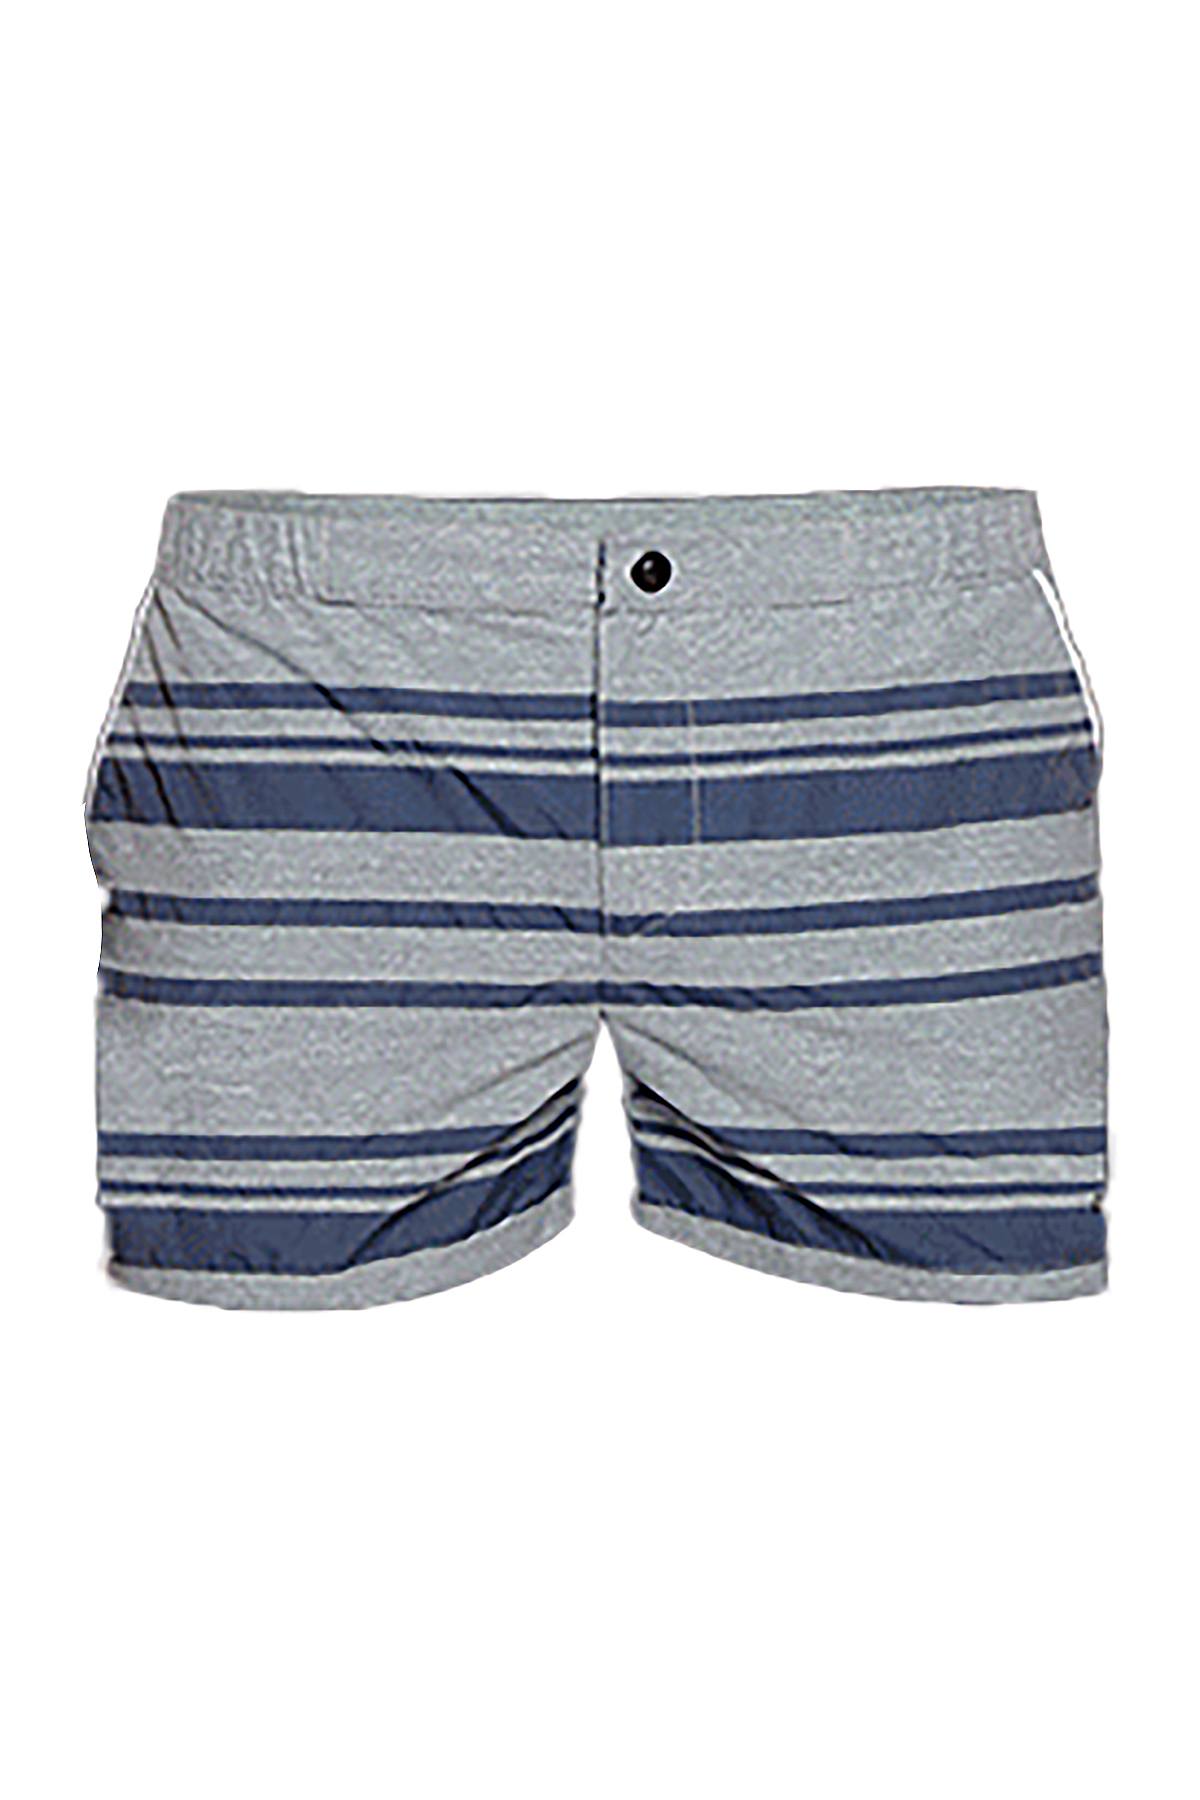 Parke and Ronen Navy/Grey 2